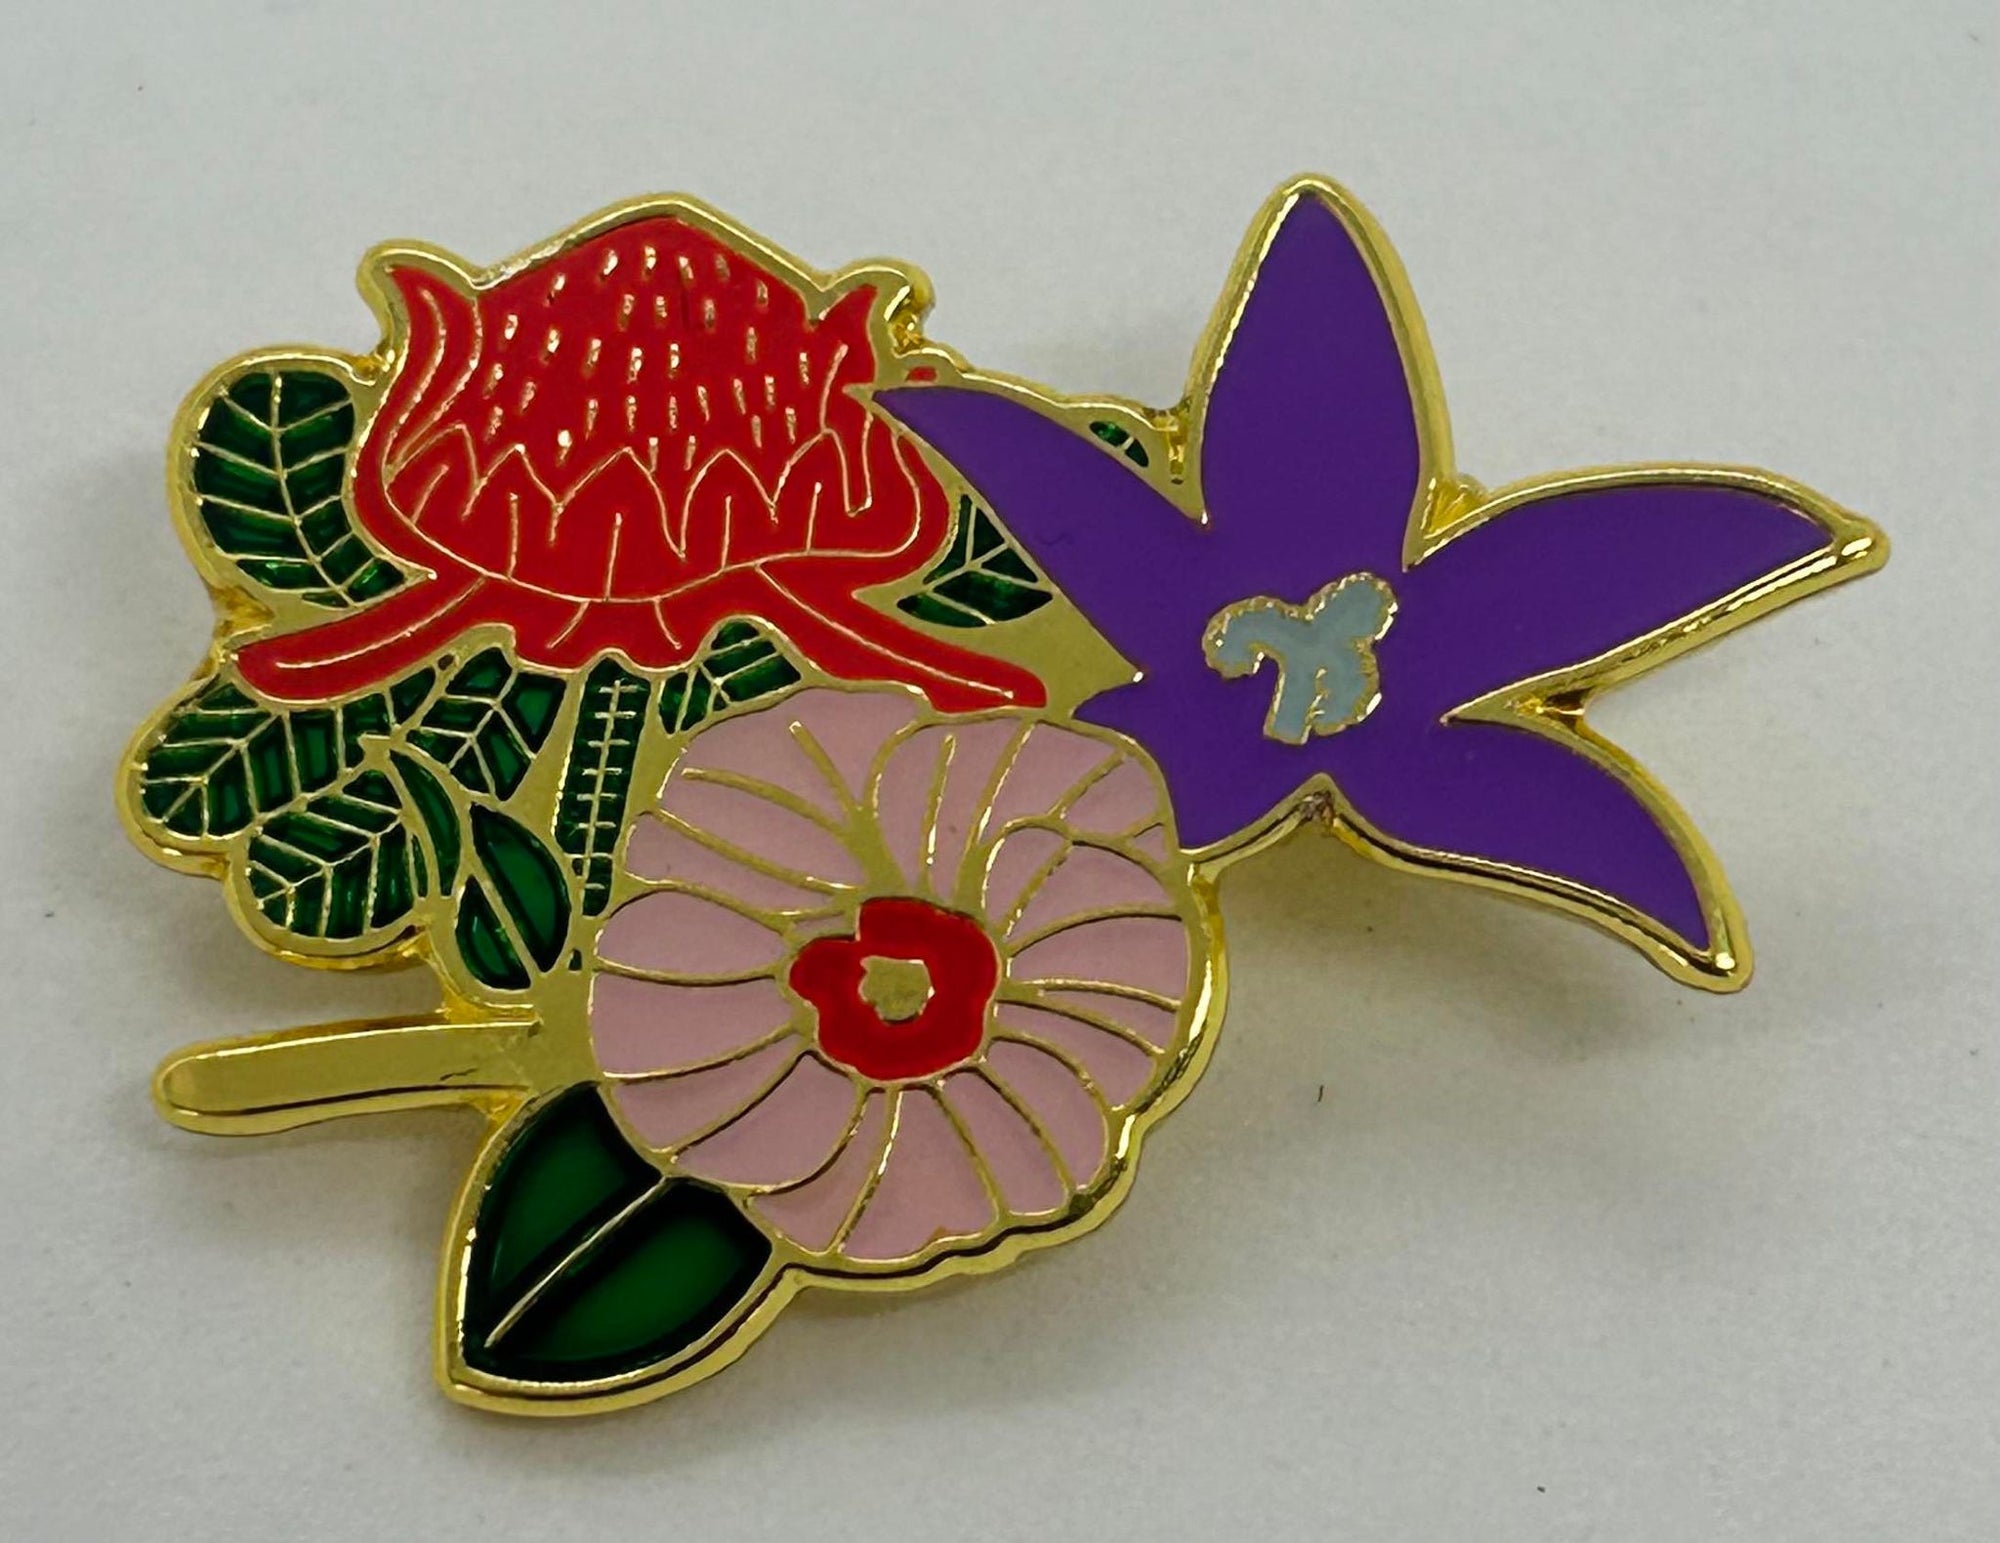 NSW ACT NT floral badge in metal